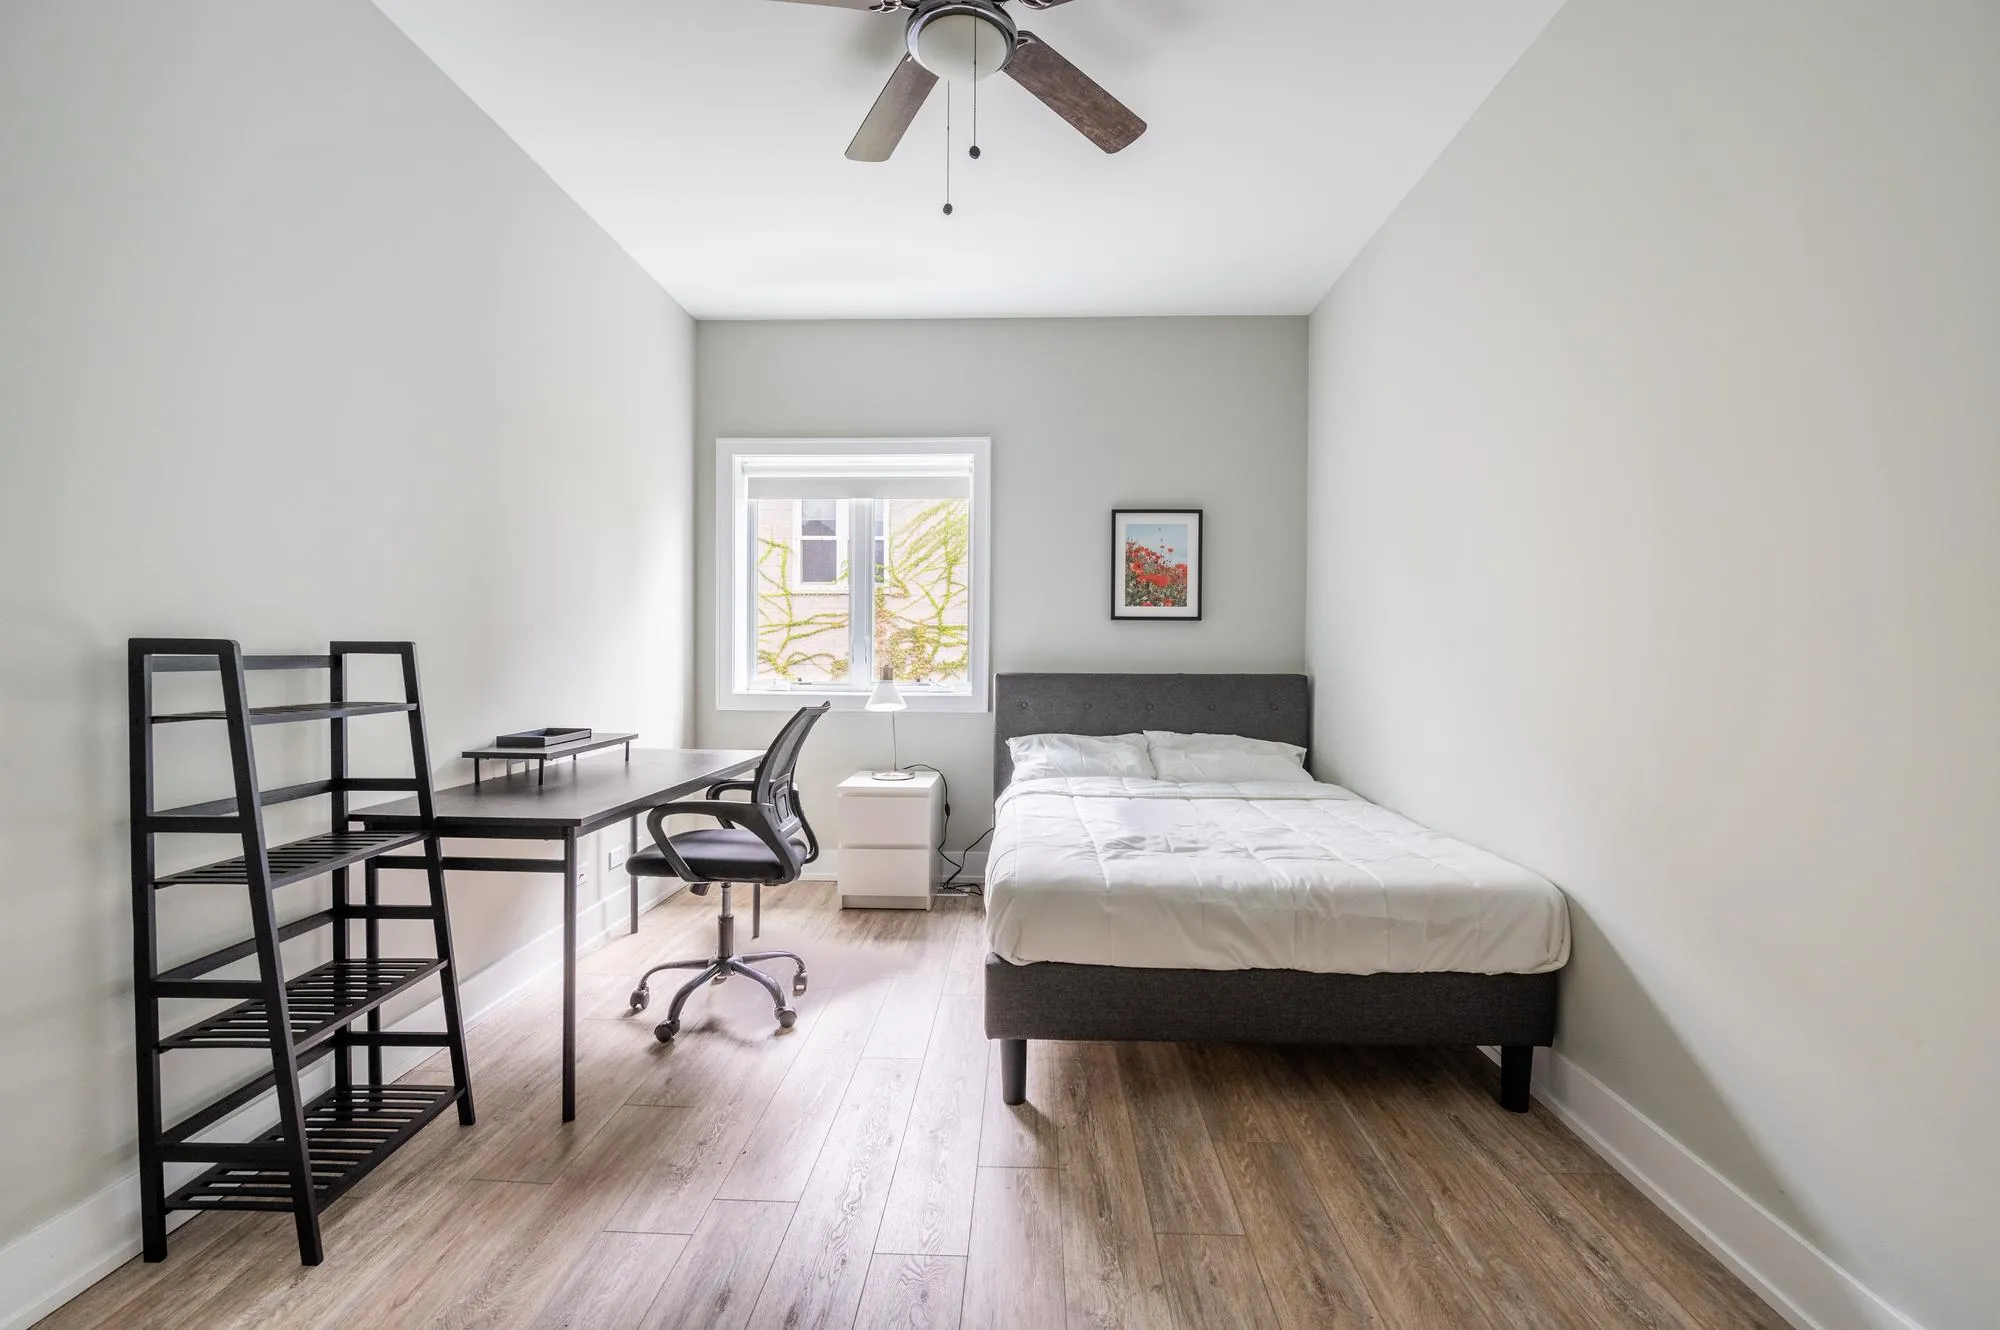 1119 S LOOMIS ST 60607-Room For Rent-unit#0201-Chicago-IL